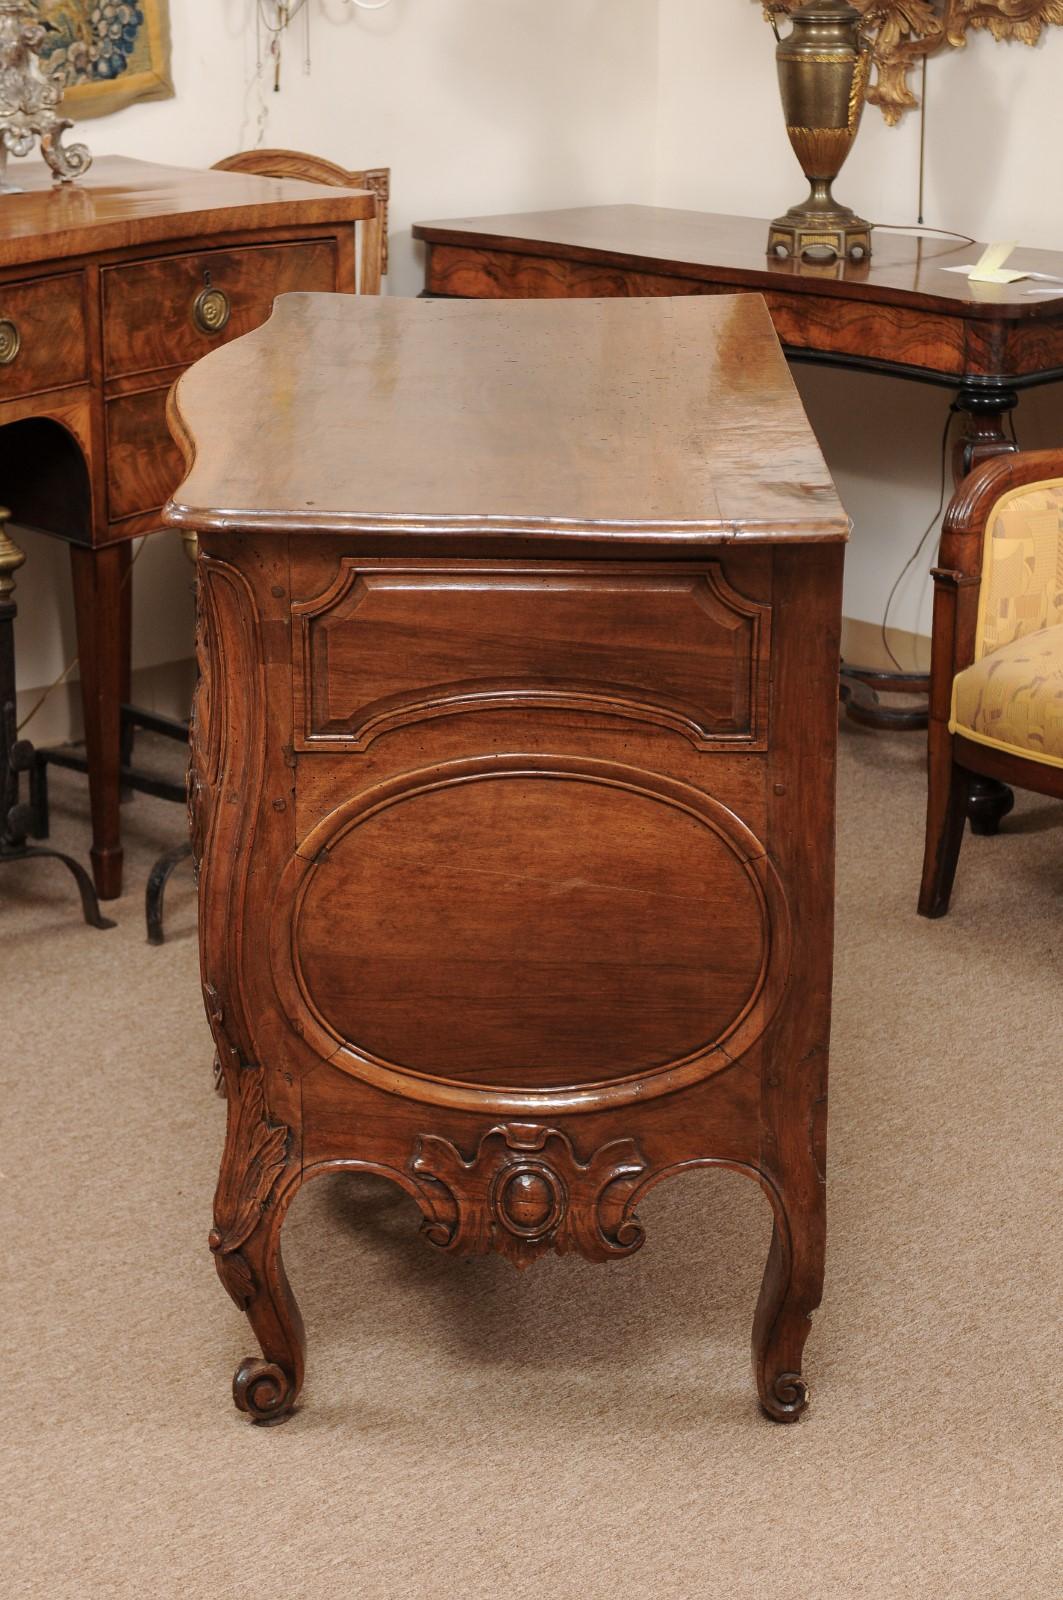 Transitional Louis XV/XVI Walnut Commode with Pierced Apron & Cabriole Legs For Sale 9